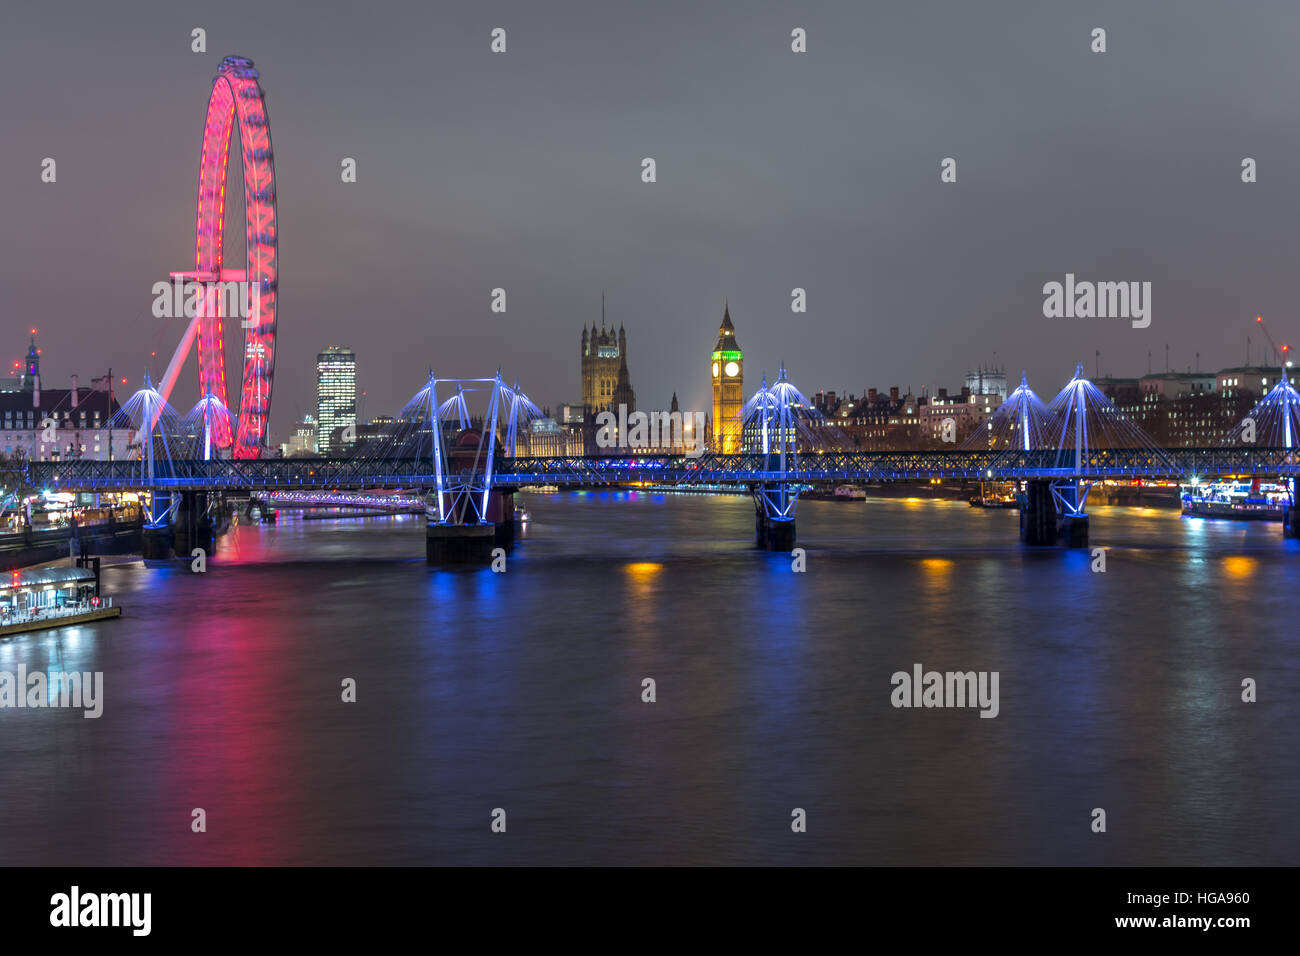 London skyline at night with embankment bridge, big ben and houses of parliament at the background, as seen from the waterloo br Stock Photo